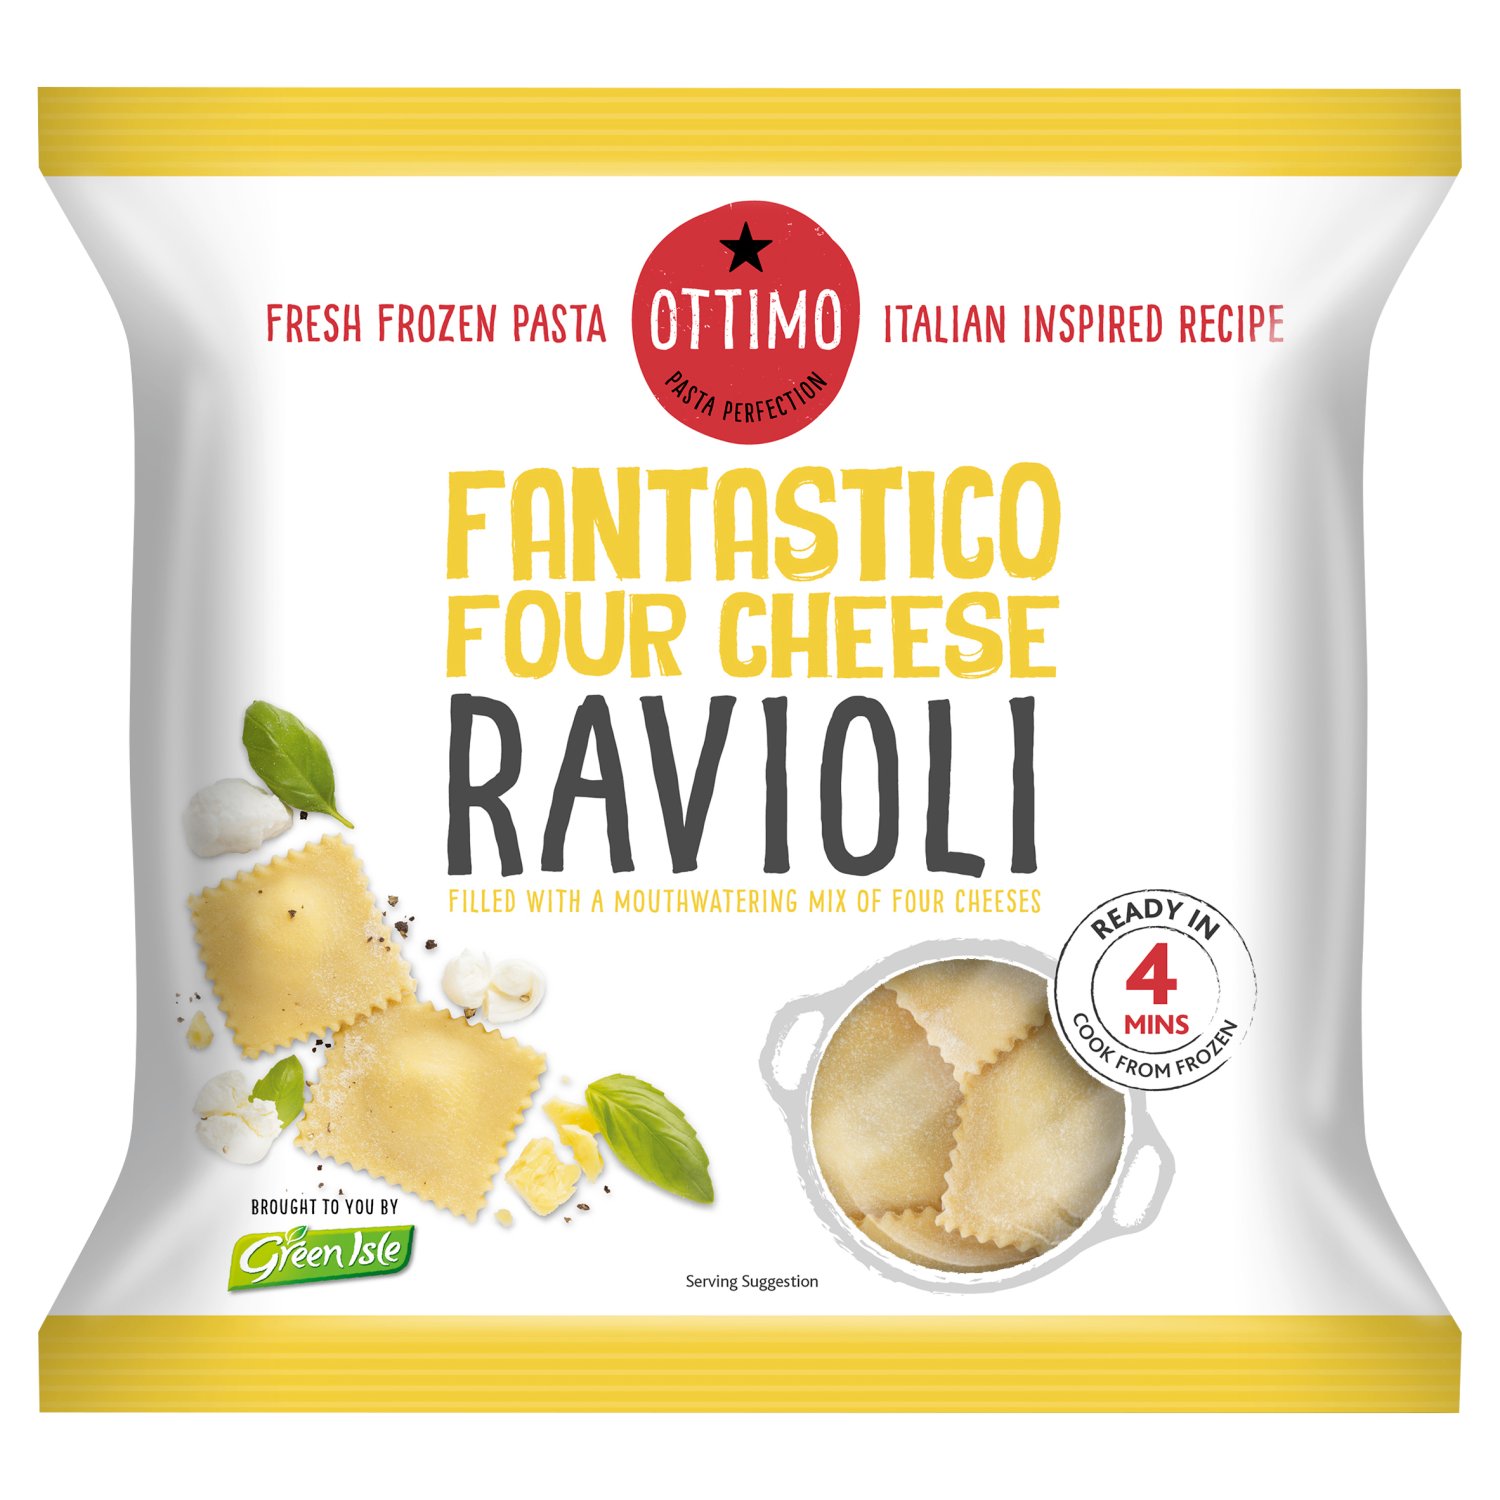 Ciao from Ottimo!
A tasty mouthwatering range of the most amazing, freshly made (& then quickly frozen) pastas. Made to make your life easier.